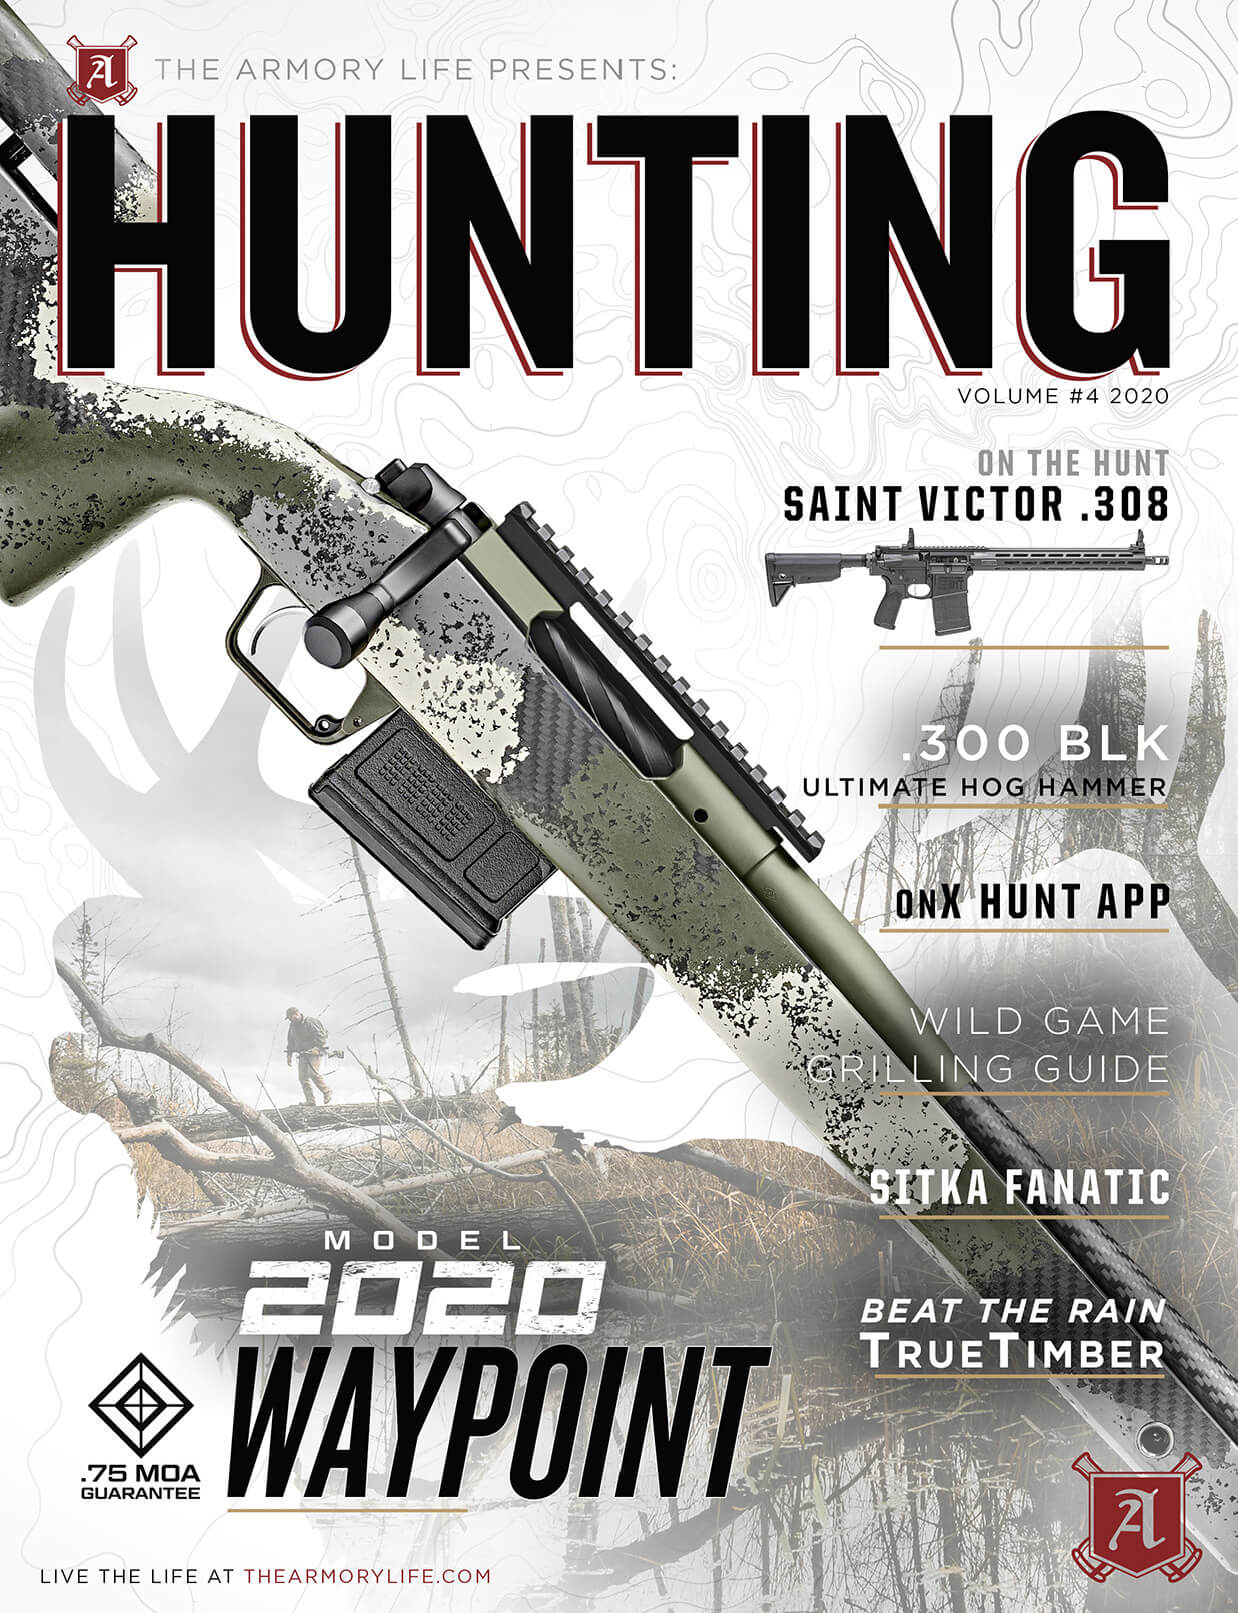 Cover for The Armory Life Digital Magazine Volume 4: Hunting